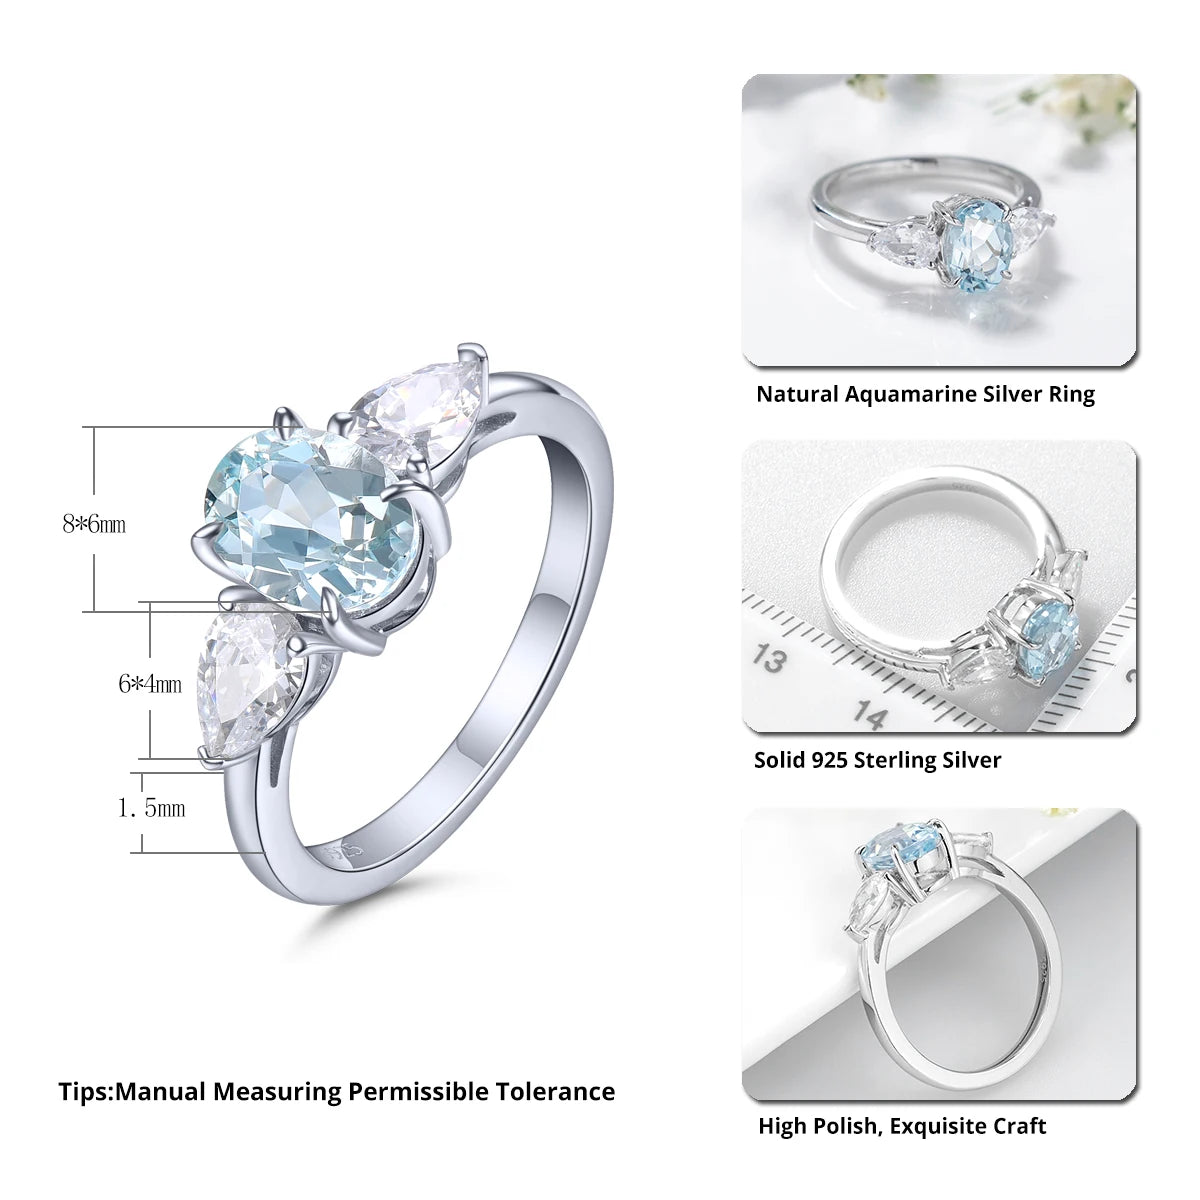 Natural Aquamarine Sterling Silver Rings 3.6 Carats Genuine Aquamarine Gemstone Light Blue Faced Cut Classic Style S925 Jewelry